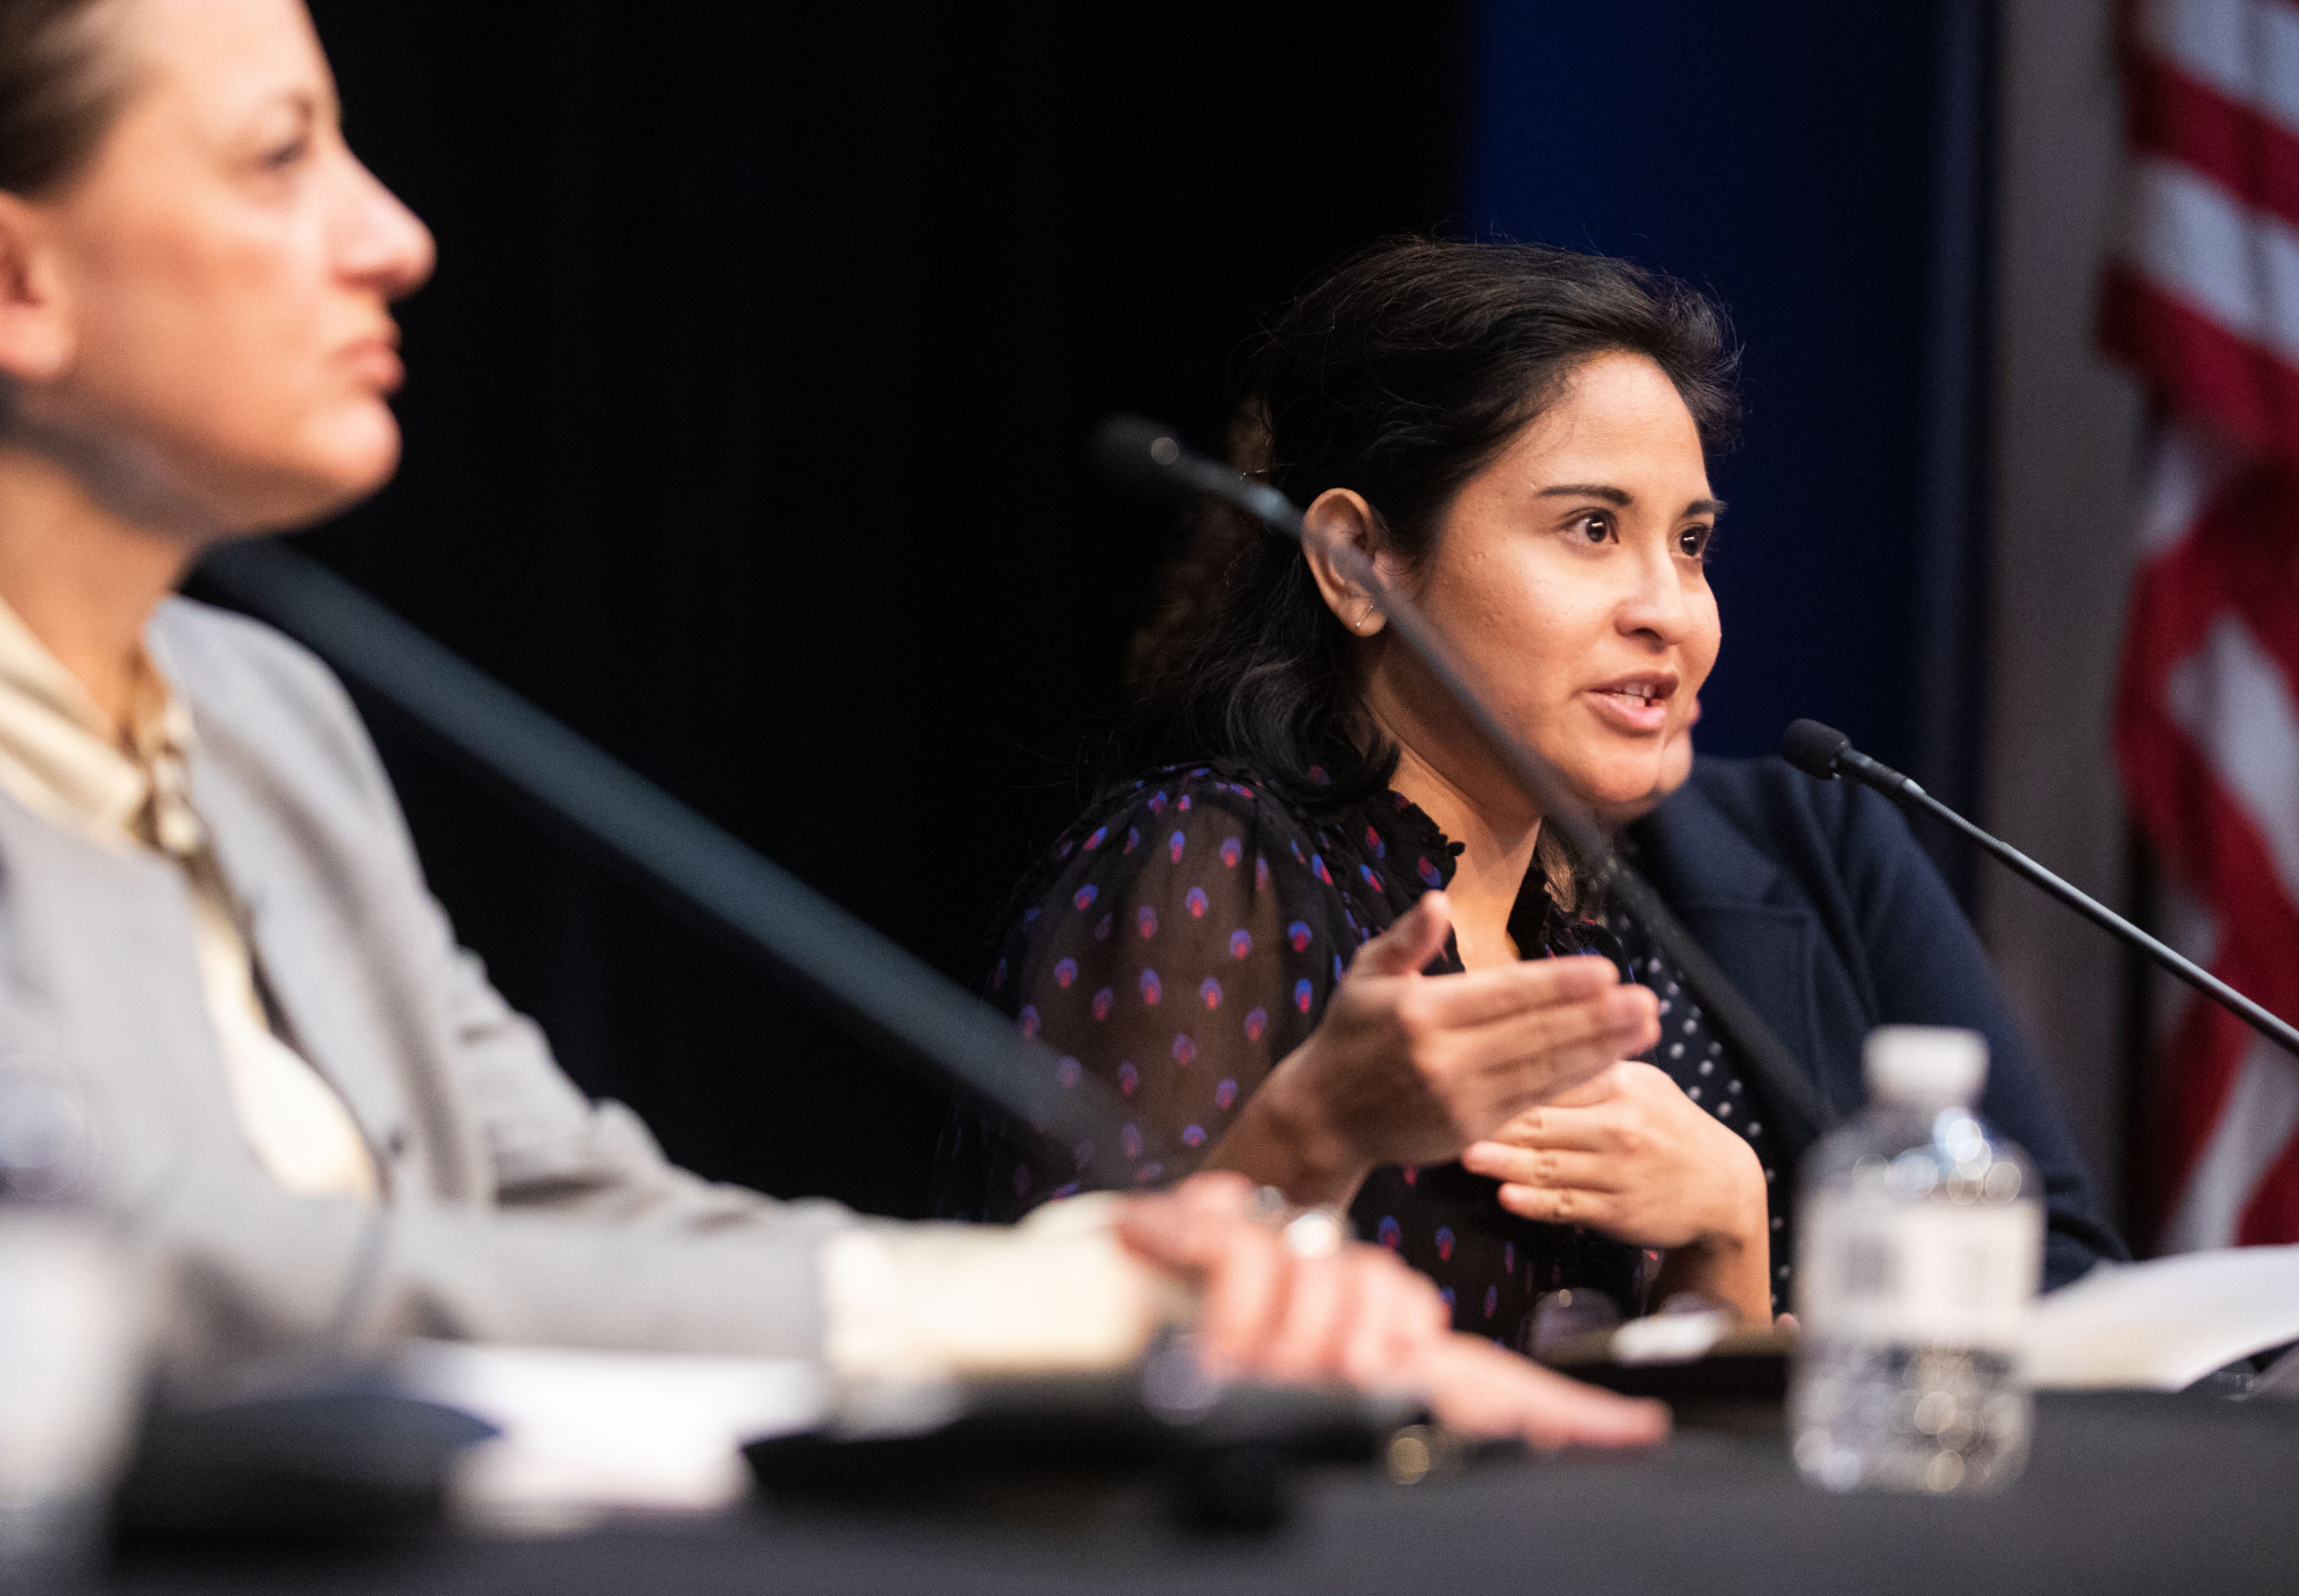 Senior Research Strategist of Streetsense Nur Asri speaks on a panel about vacant storefronts at the Brooklyn Heights Association annual meeting at St. Francis College on Feb. 26, 2020. Photo: Paul Frangipane/Brooklyn Eagle